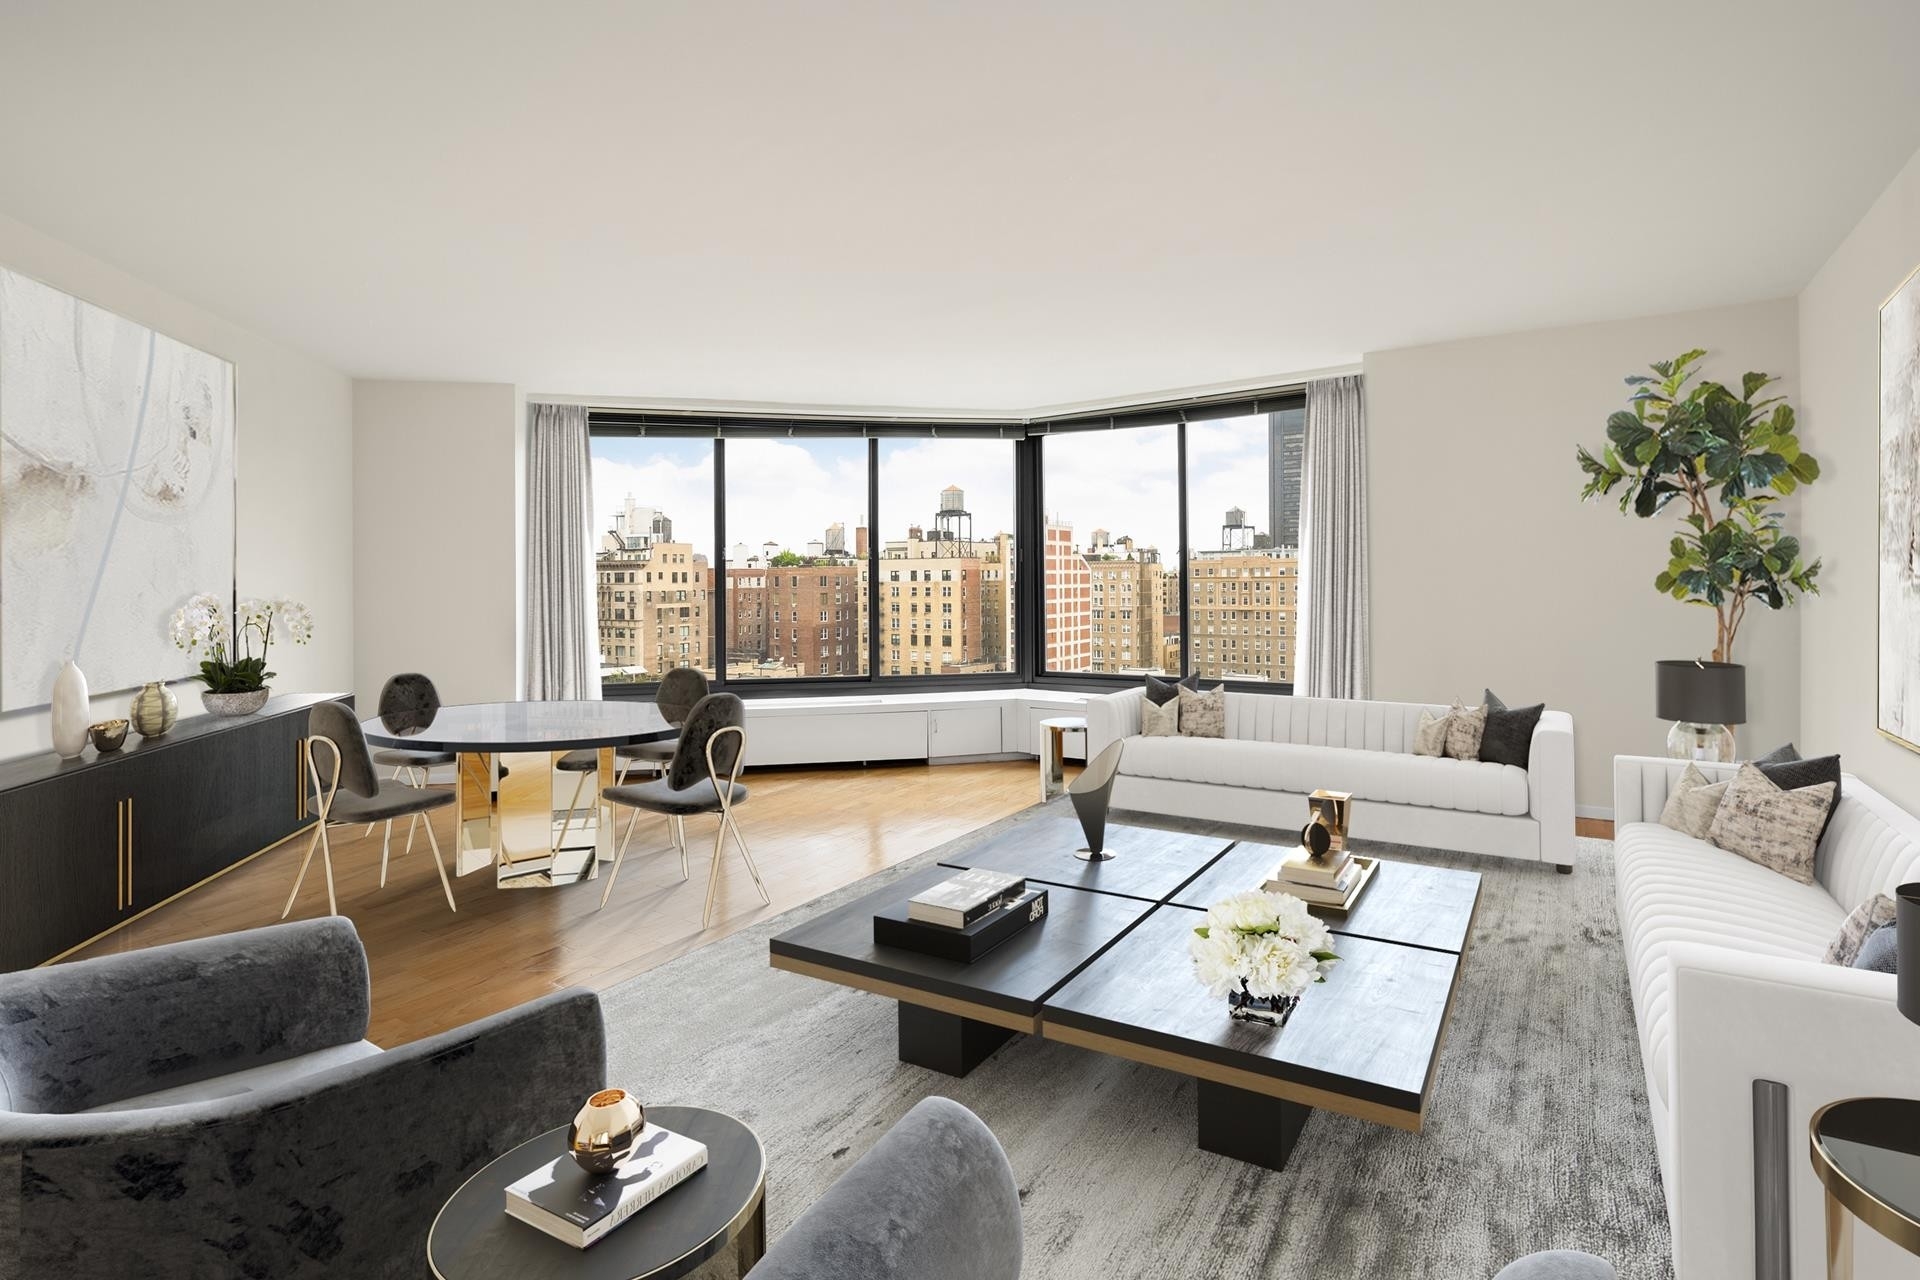 Condominium at Carnegie Hill Tower, 40 East 94th St, 13D New York